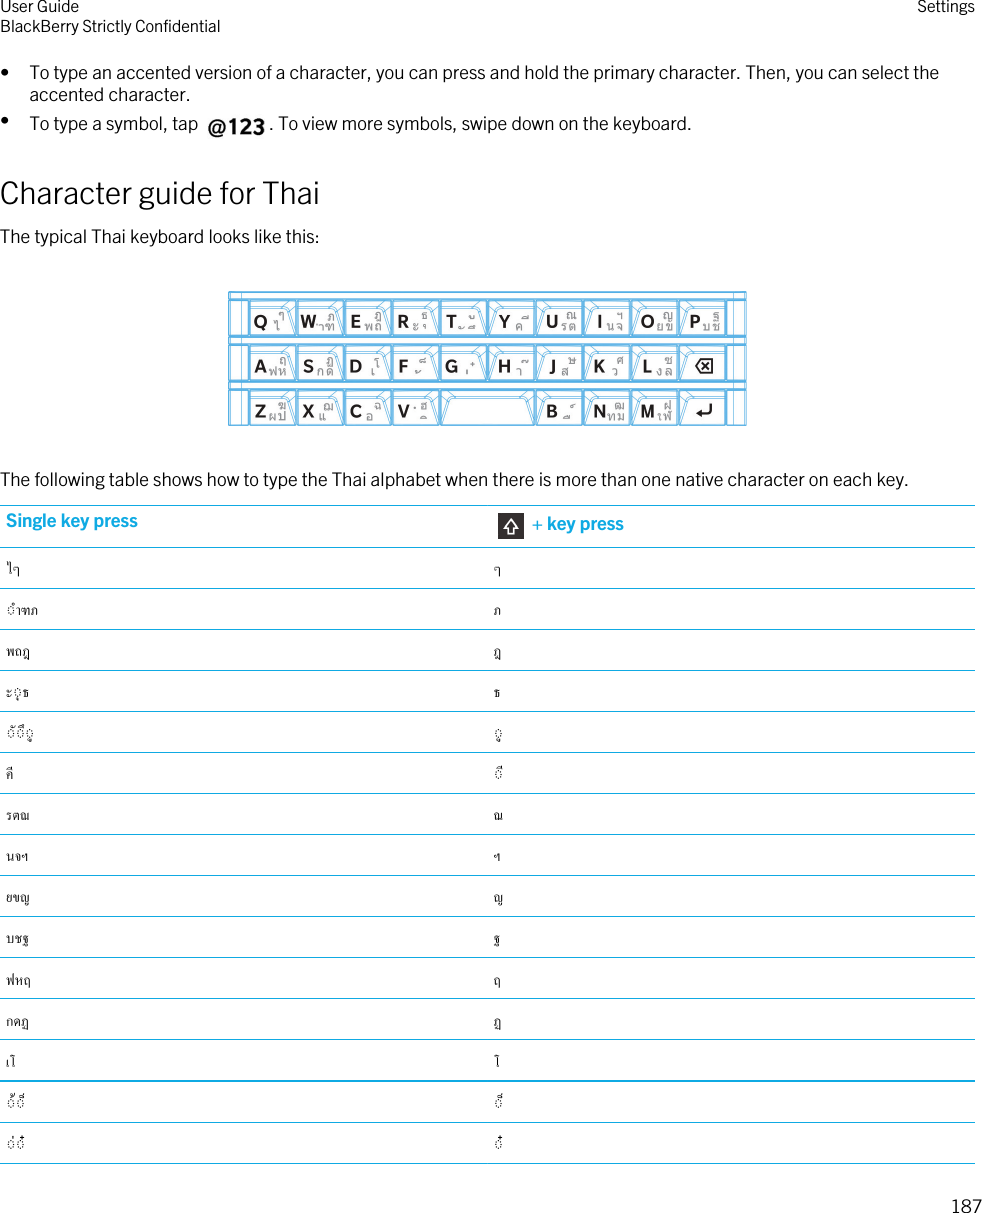 • To type an accented version of a character, you can press and hold the primary character. Then, you can select the accented character.•To type a symbol, tap  . To view more symbols, swipe down on the keyboard.Character guide for ThaiThe typical Thai keyboard looks like this:  The following table shows how to type the Thai alphabet when there is more than one native character on each key.Single key press  + key press             User GuideBlackBerry Strictly Confidential Settings187